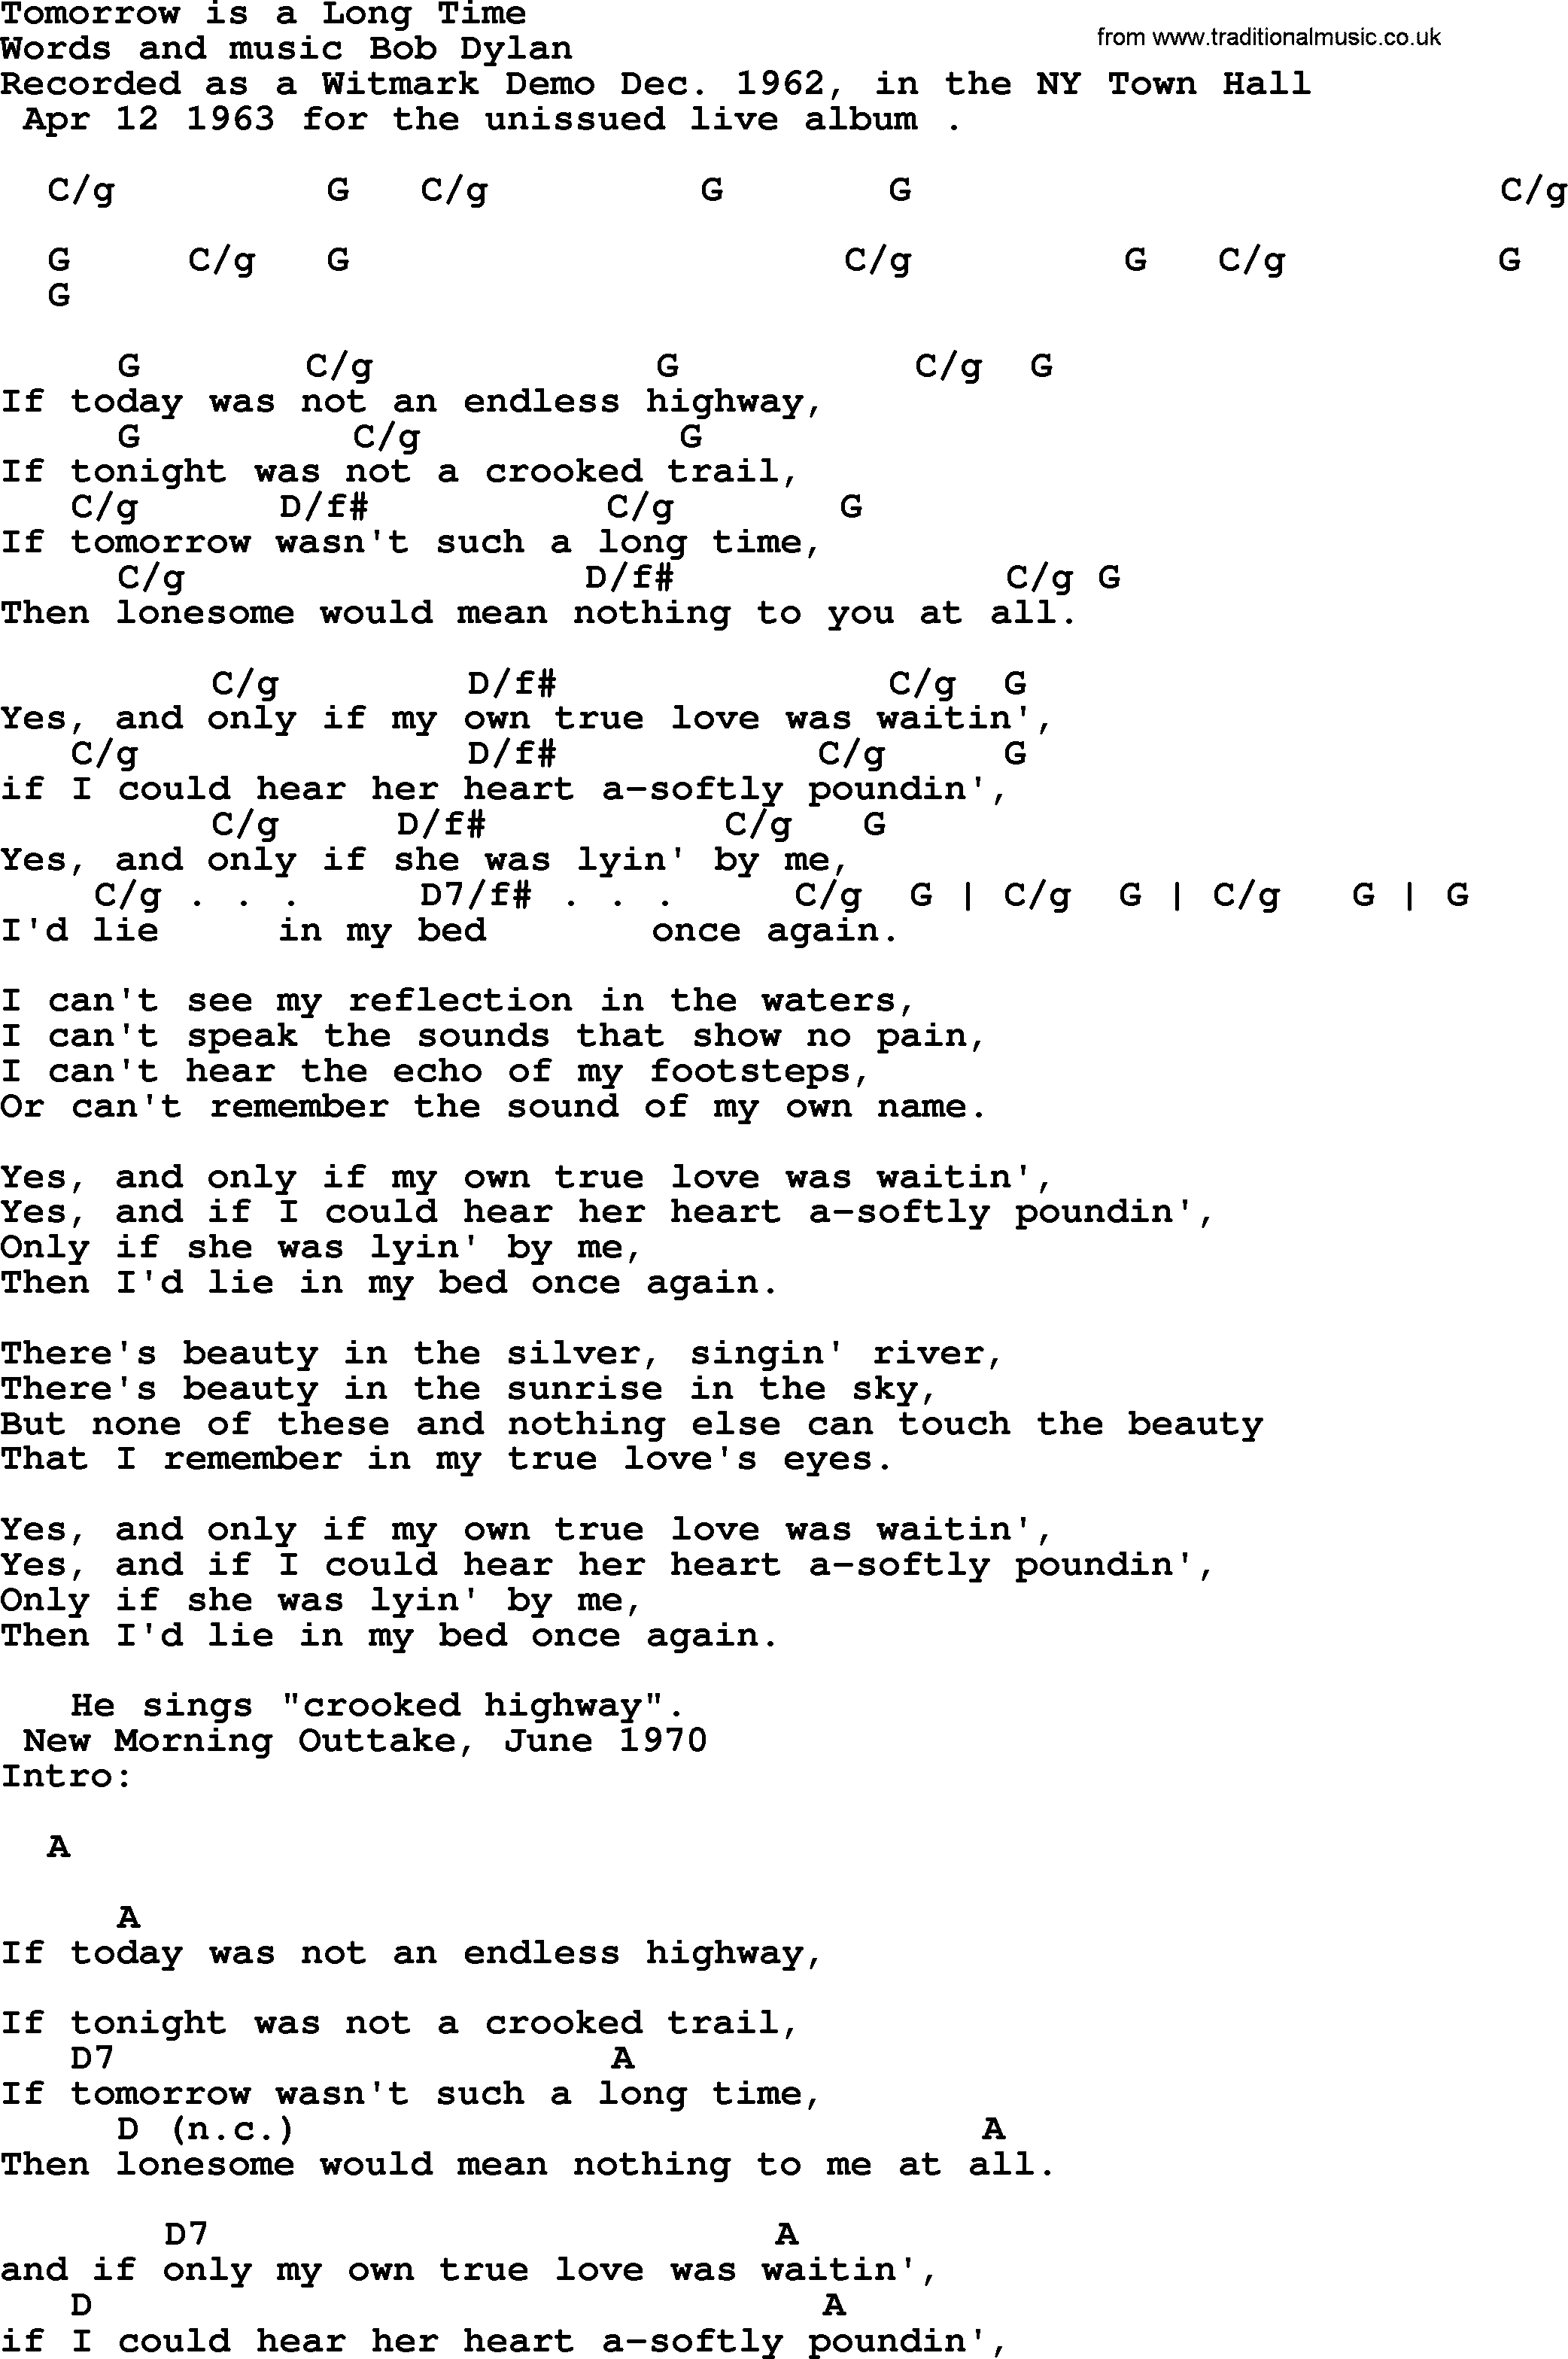 Bob Dylan song, lyrics with chords - Tomorrow is a Long Time